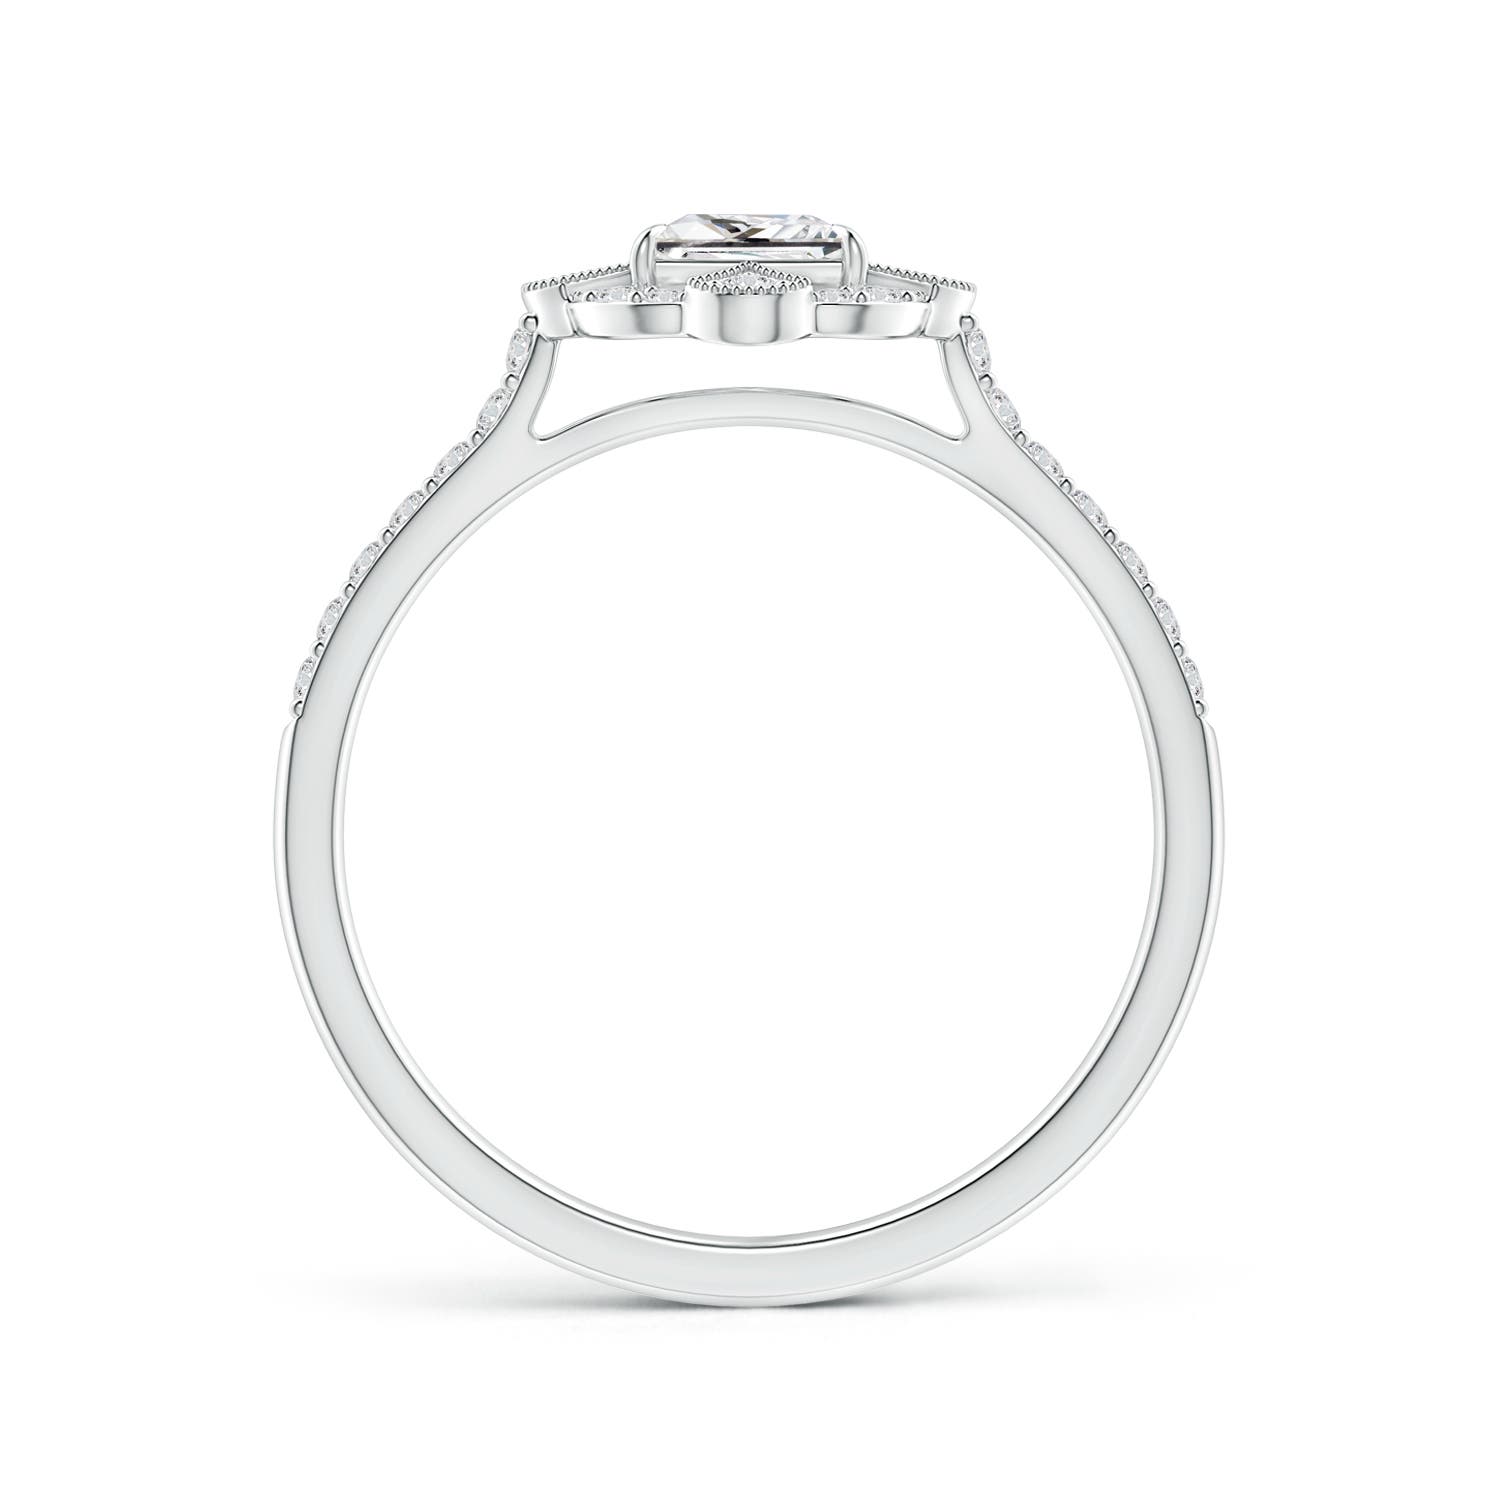 H, SI2 / 0.74 CT / 14 KT White Gold